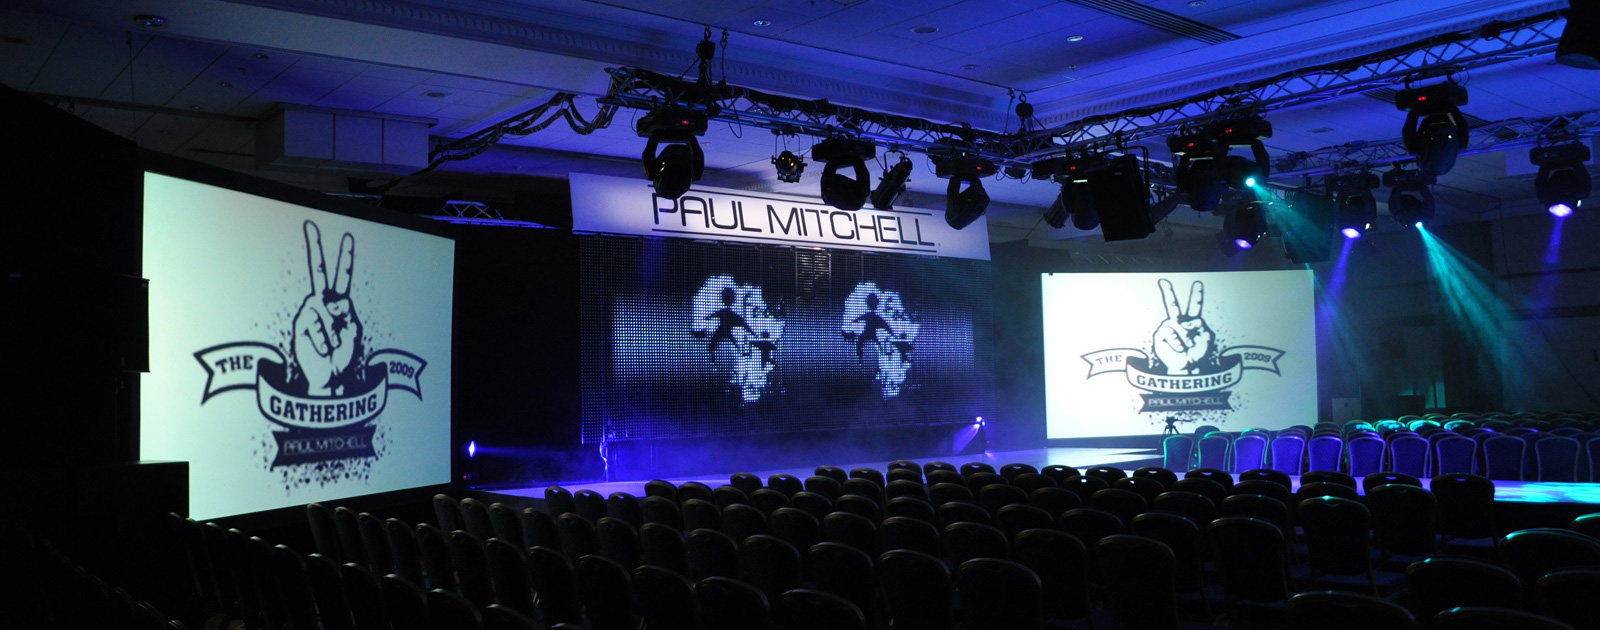 Paul-Mitchell-stage-LED-screen